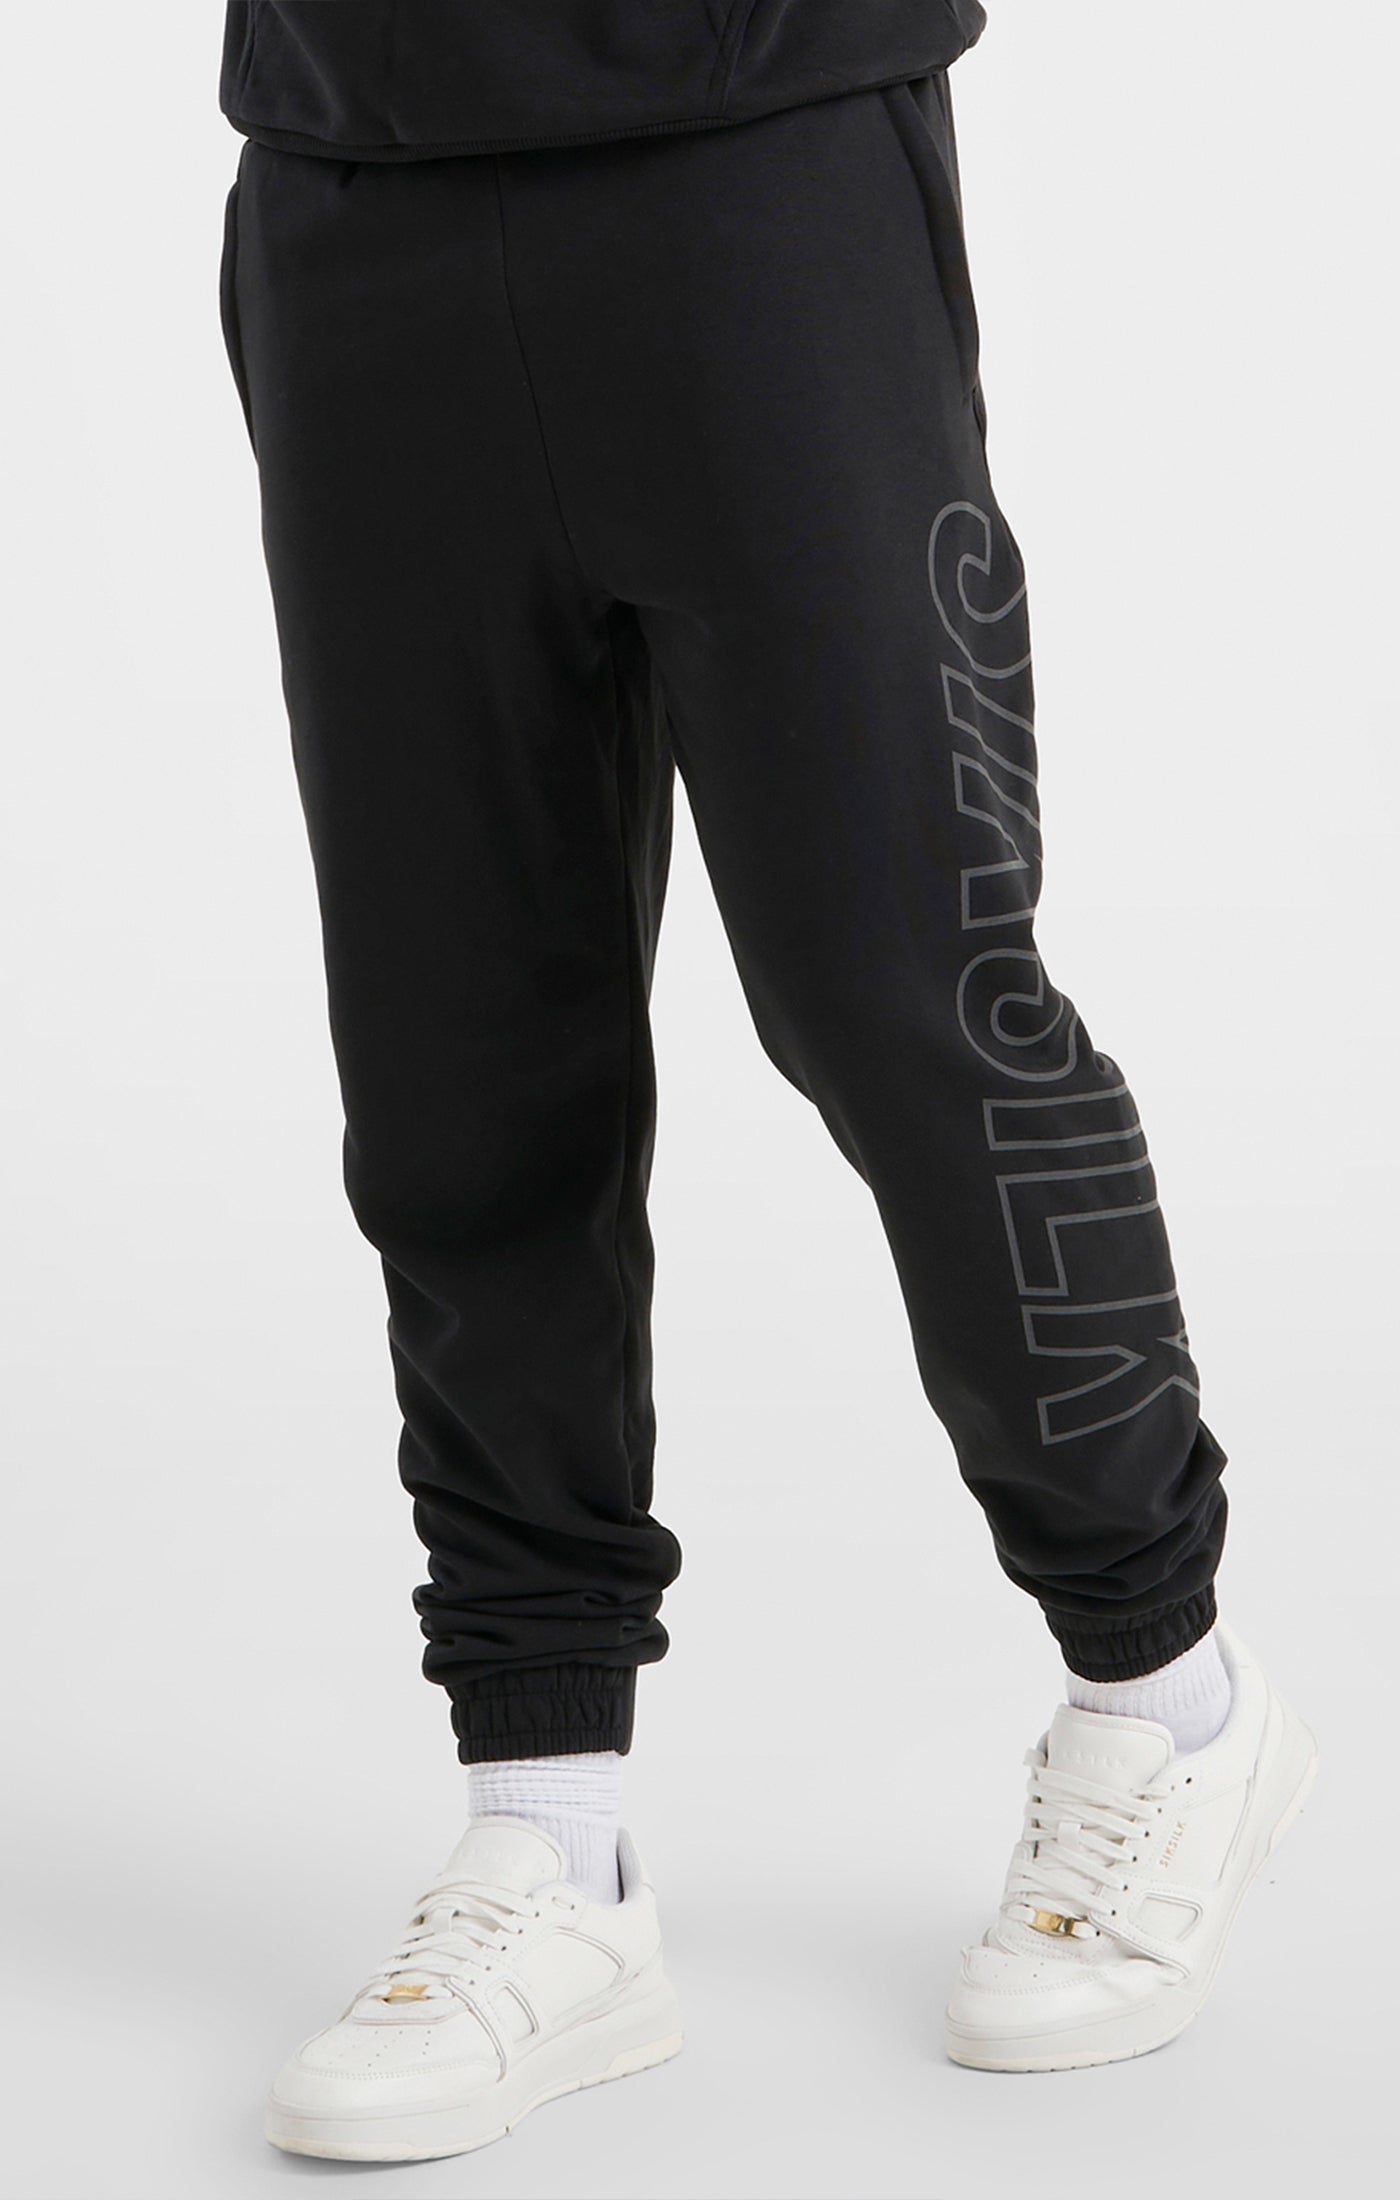 Load image into Gallery viewer, Black Sports Relaxed Fit Large Branding Pant (1)